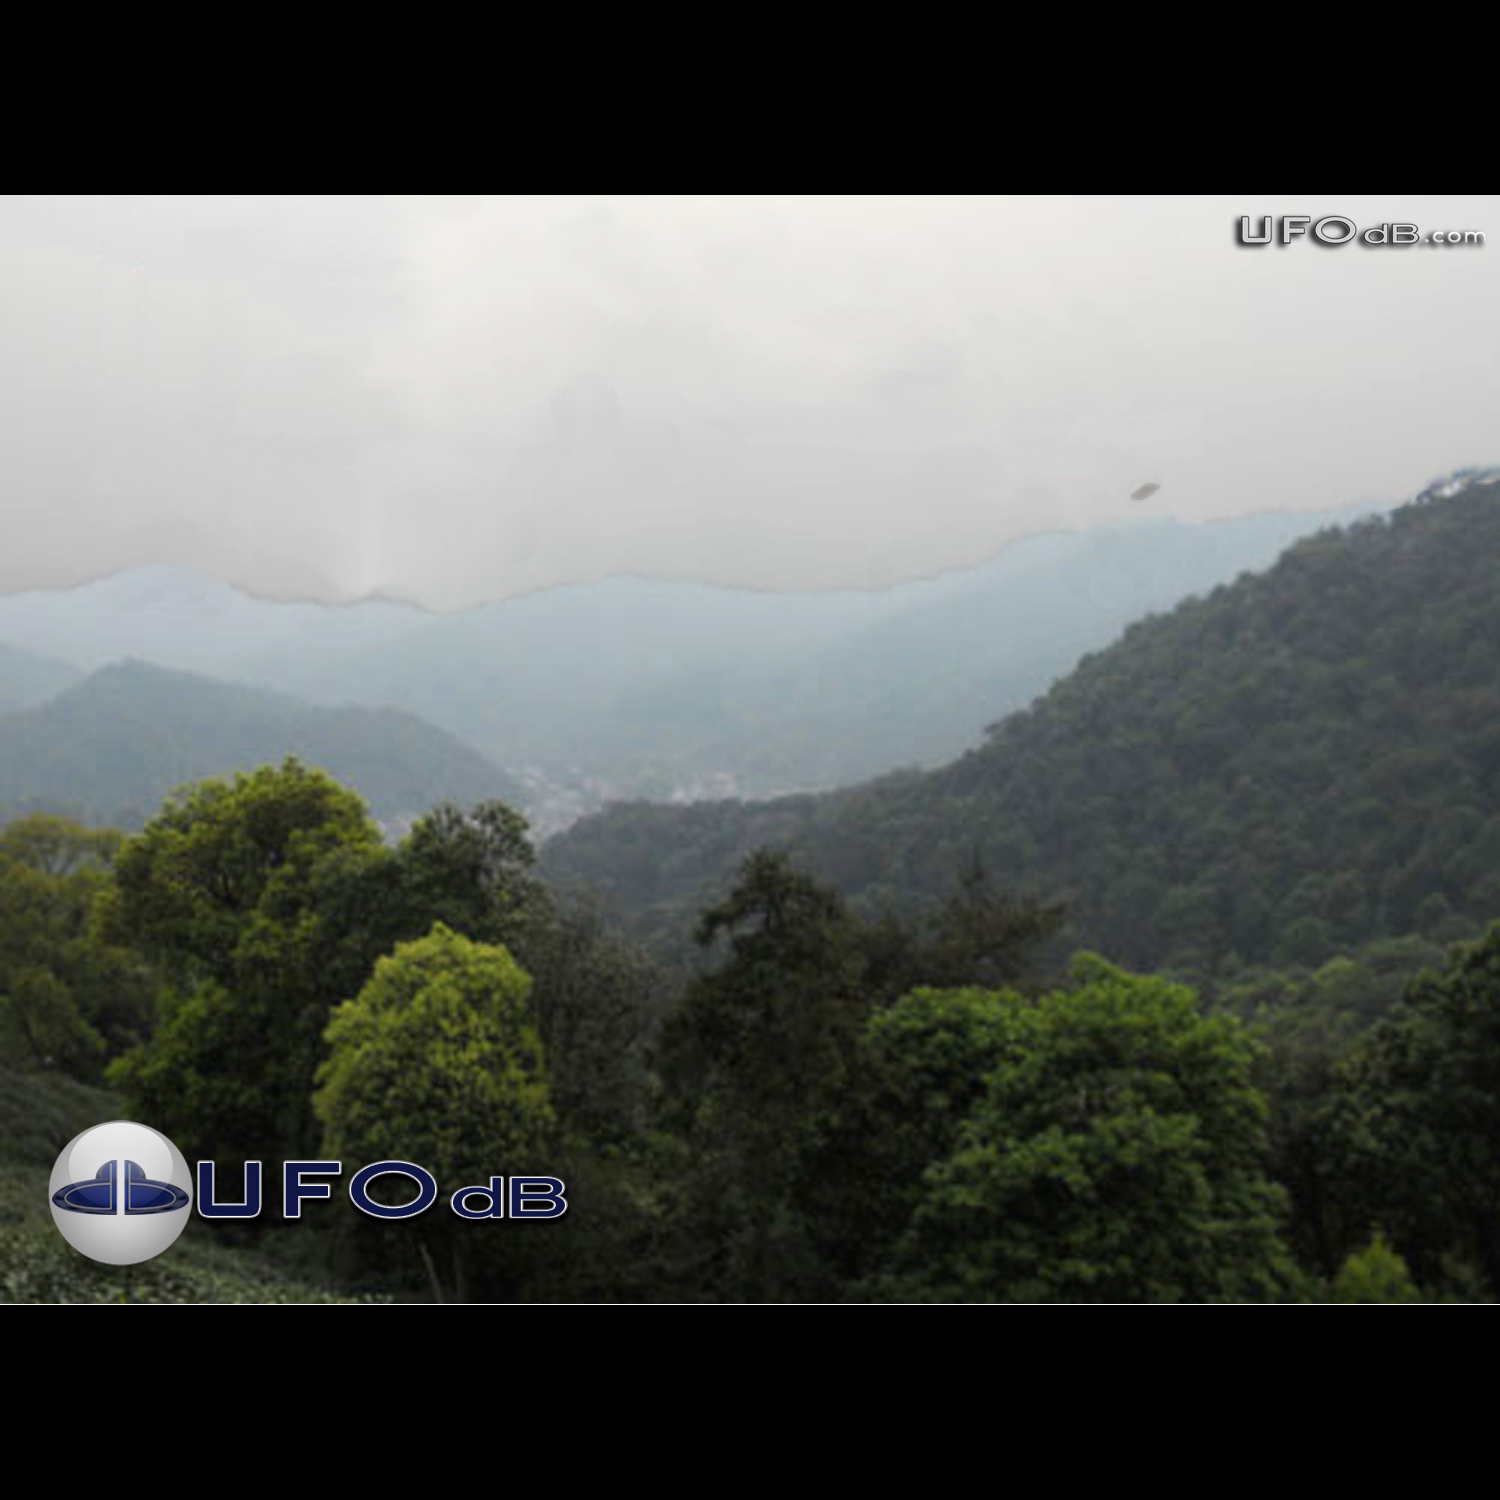 Humming whirring sounds heard with UFO picture | Hangzhou | April 2011 UFO Picture #332-1